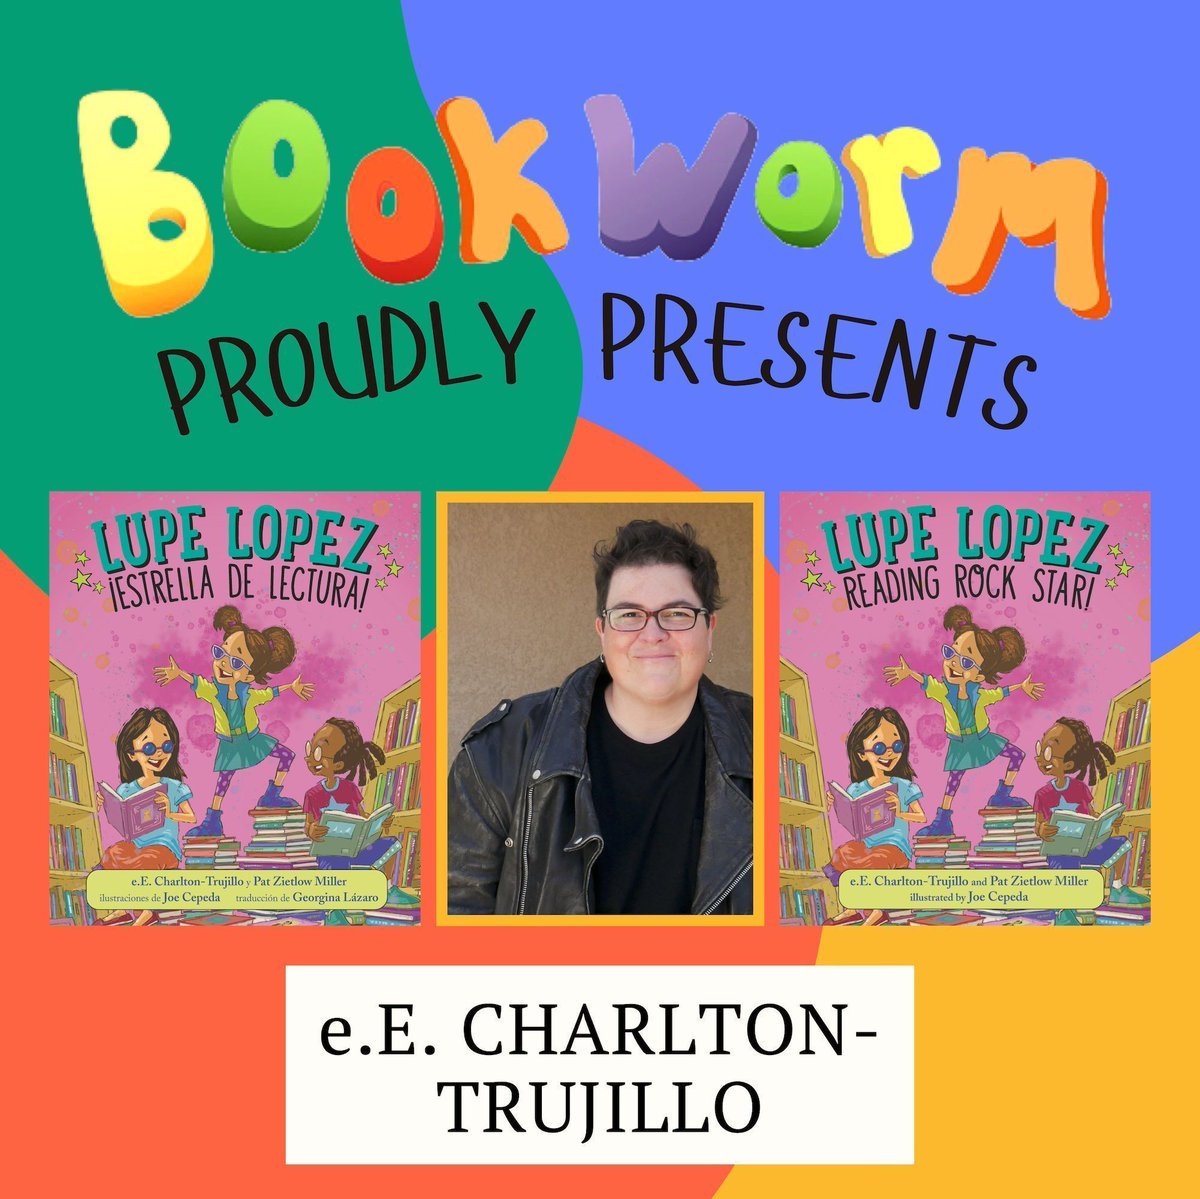 Did you guess correctly? The third author coming to #BookwormHouston in 2024 is... e.E. Charlton-Trujillo with the book, Lupe Lopez: Reading Rock Star! Who do you think will be next? @pinatadirector @Candlewick